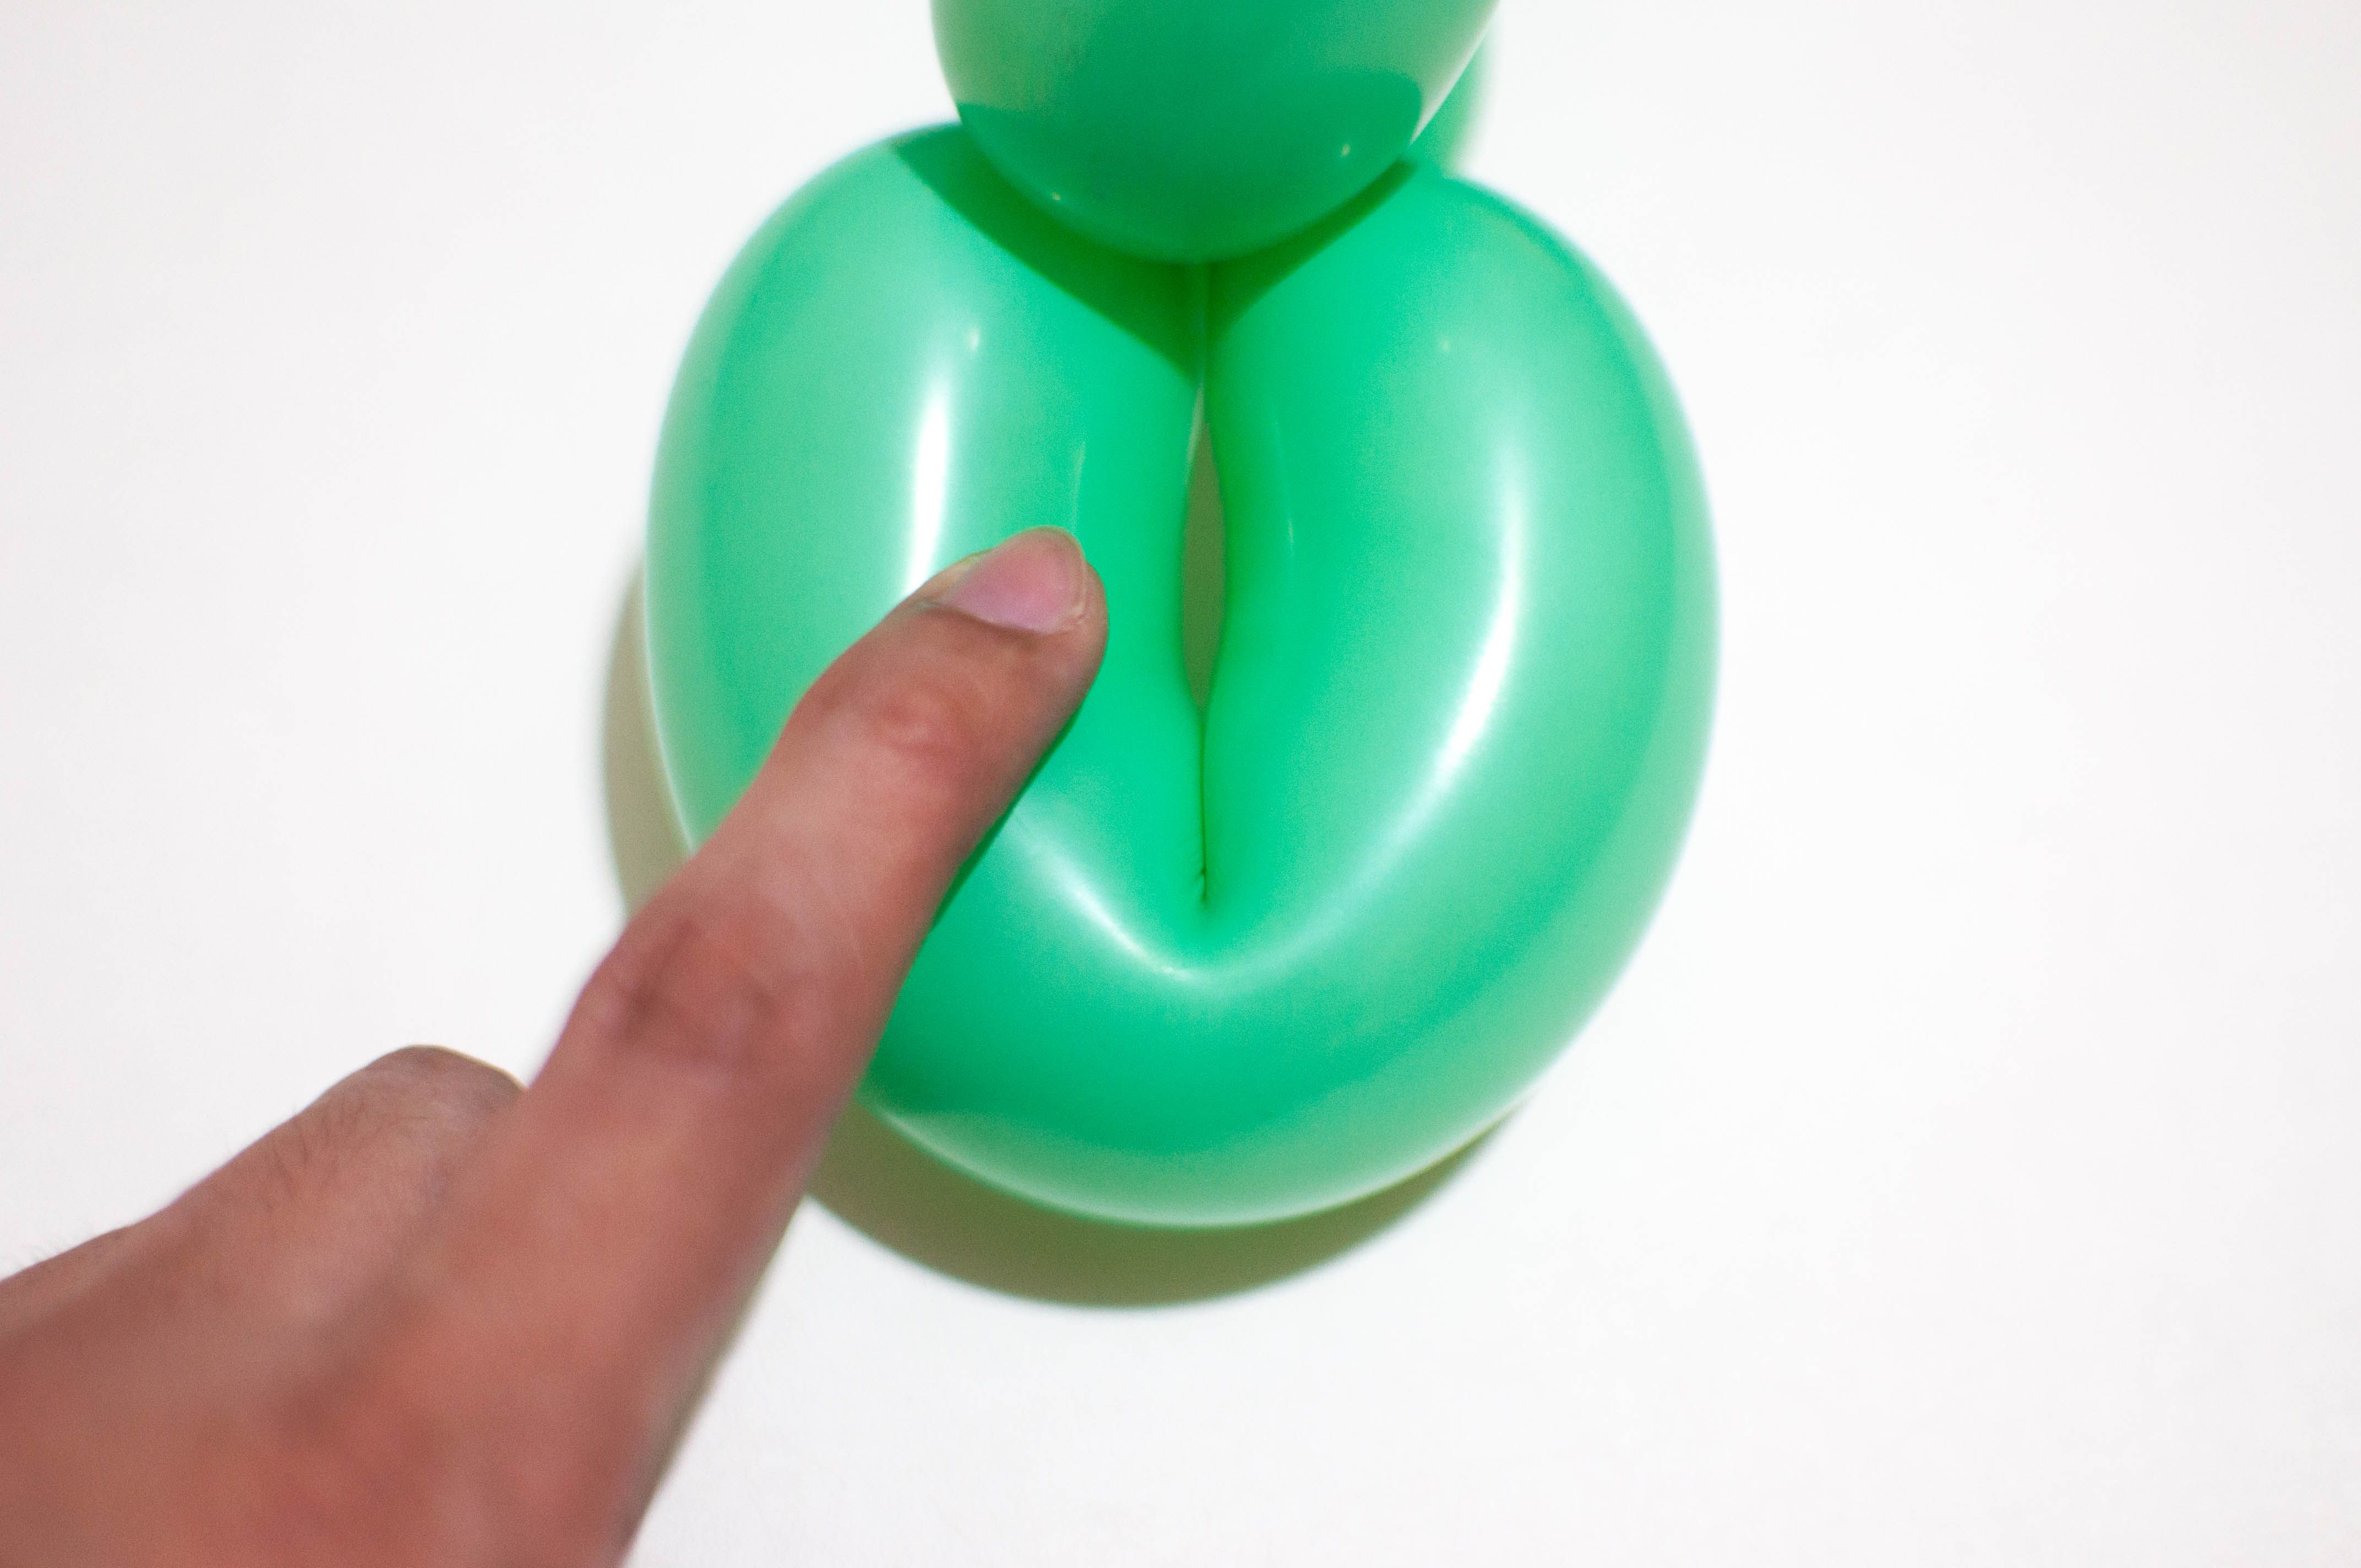 holding a green balloon against white background a concept of female vagina